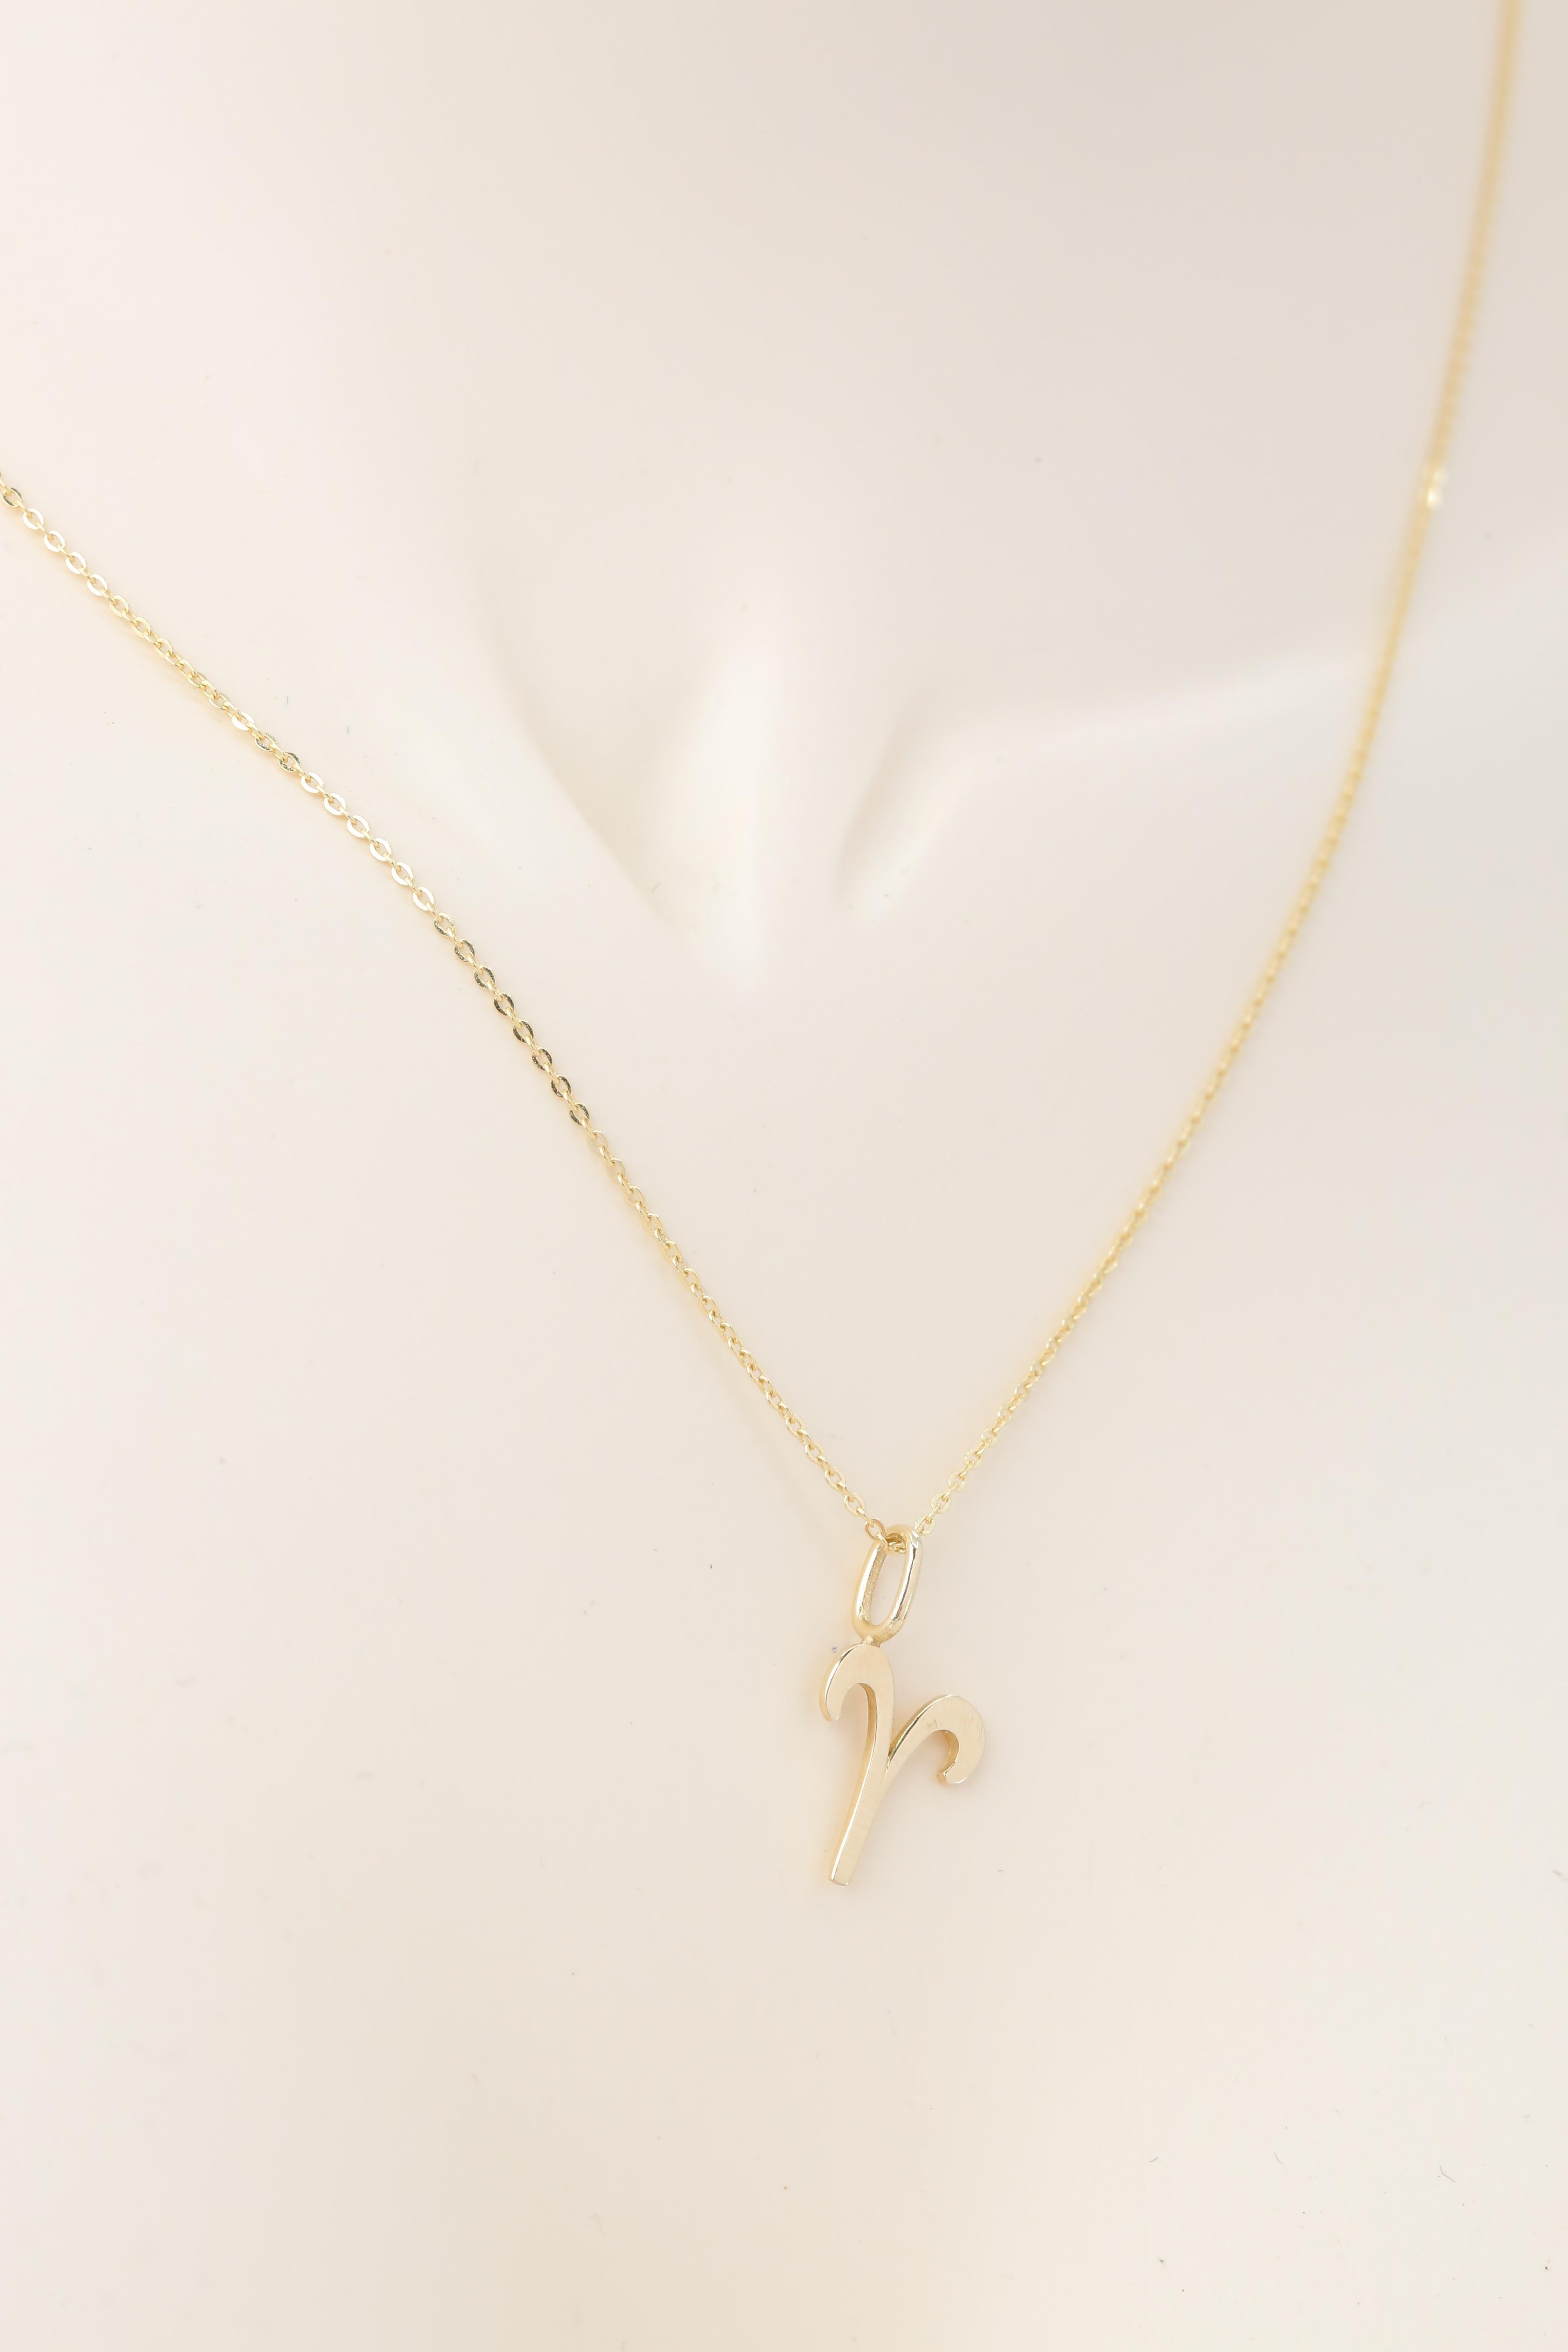 real gold aries necklace